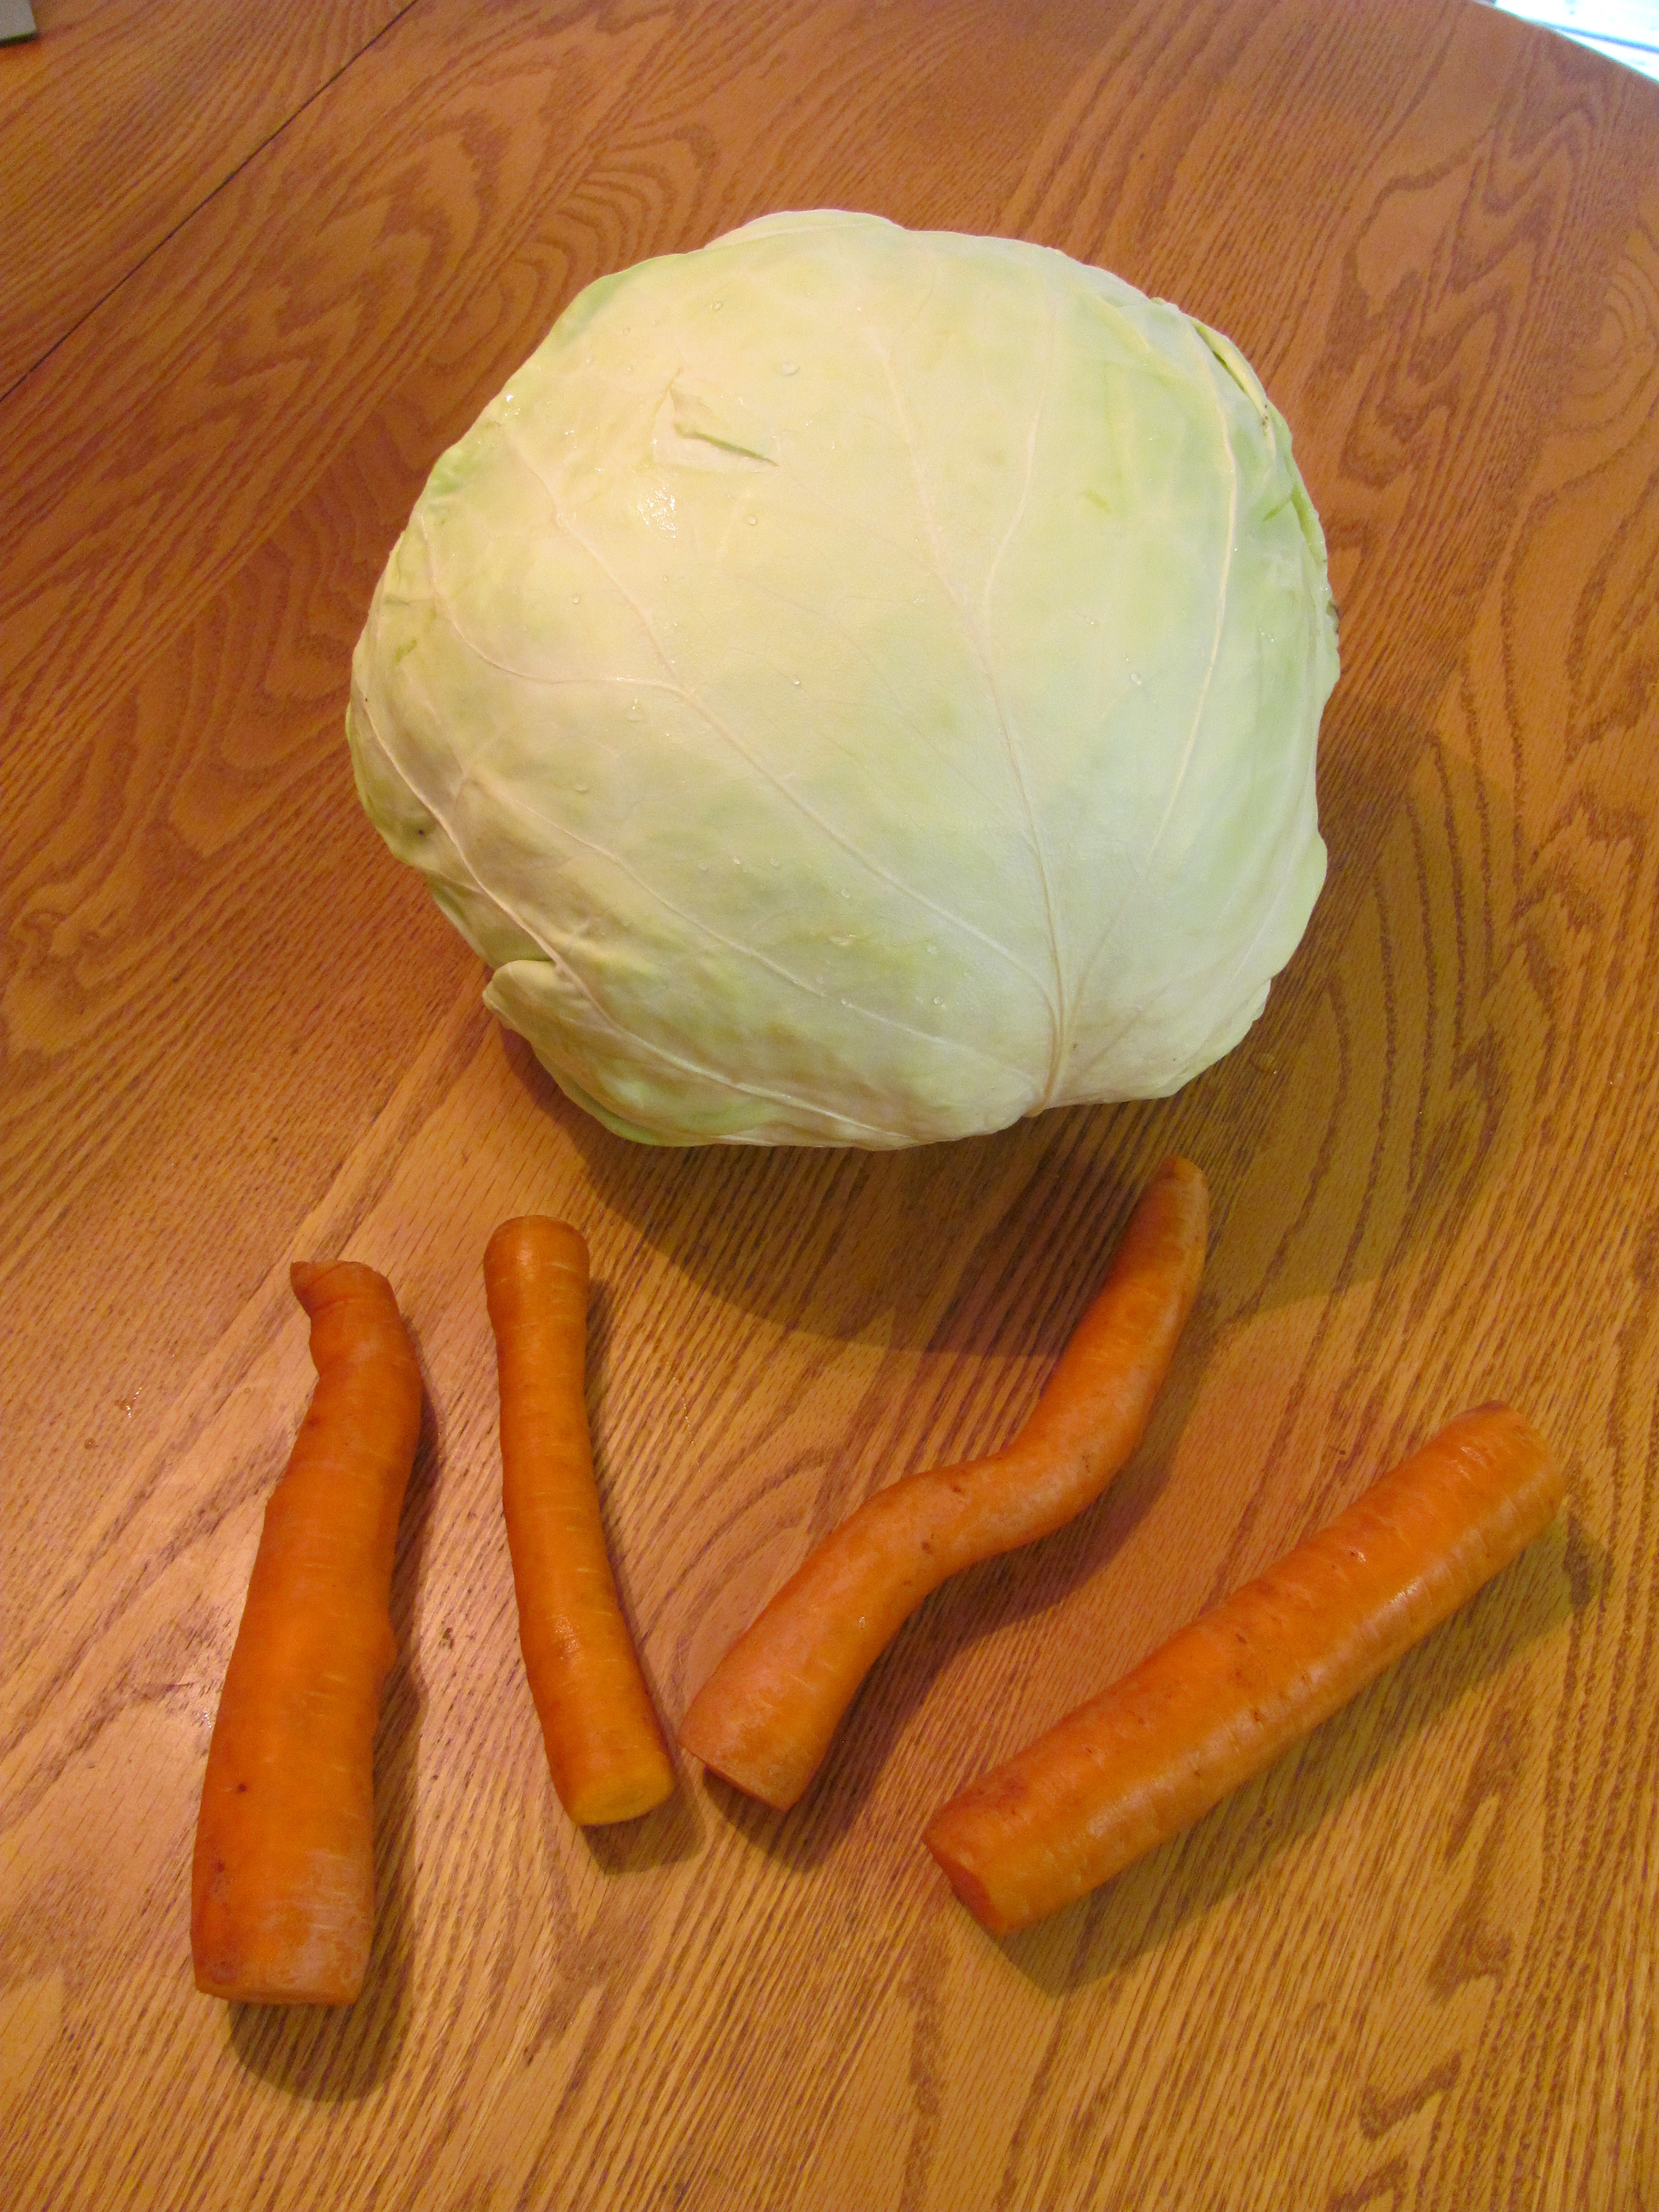 Carrots and Cabbage